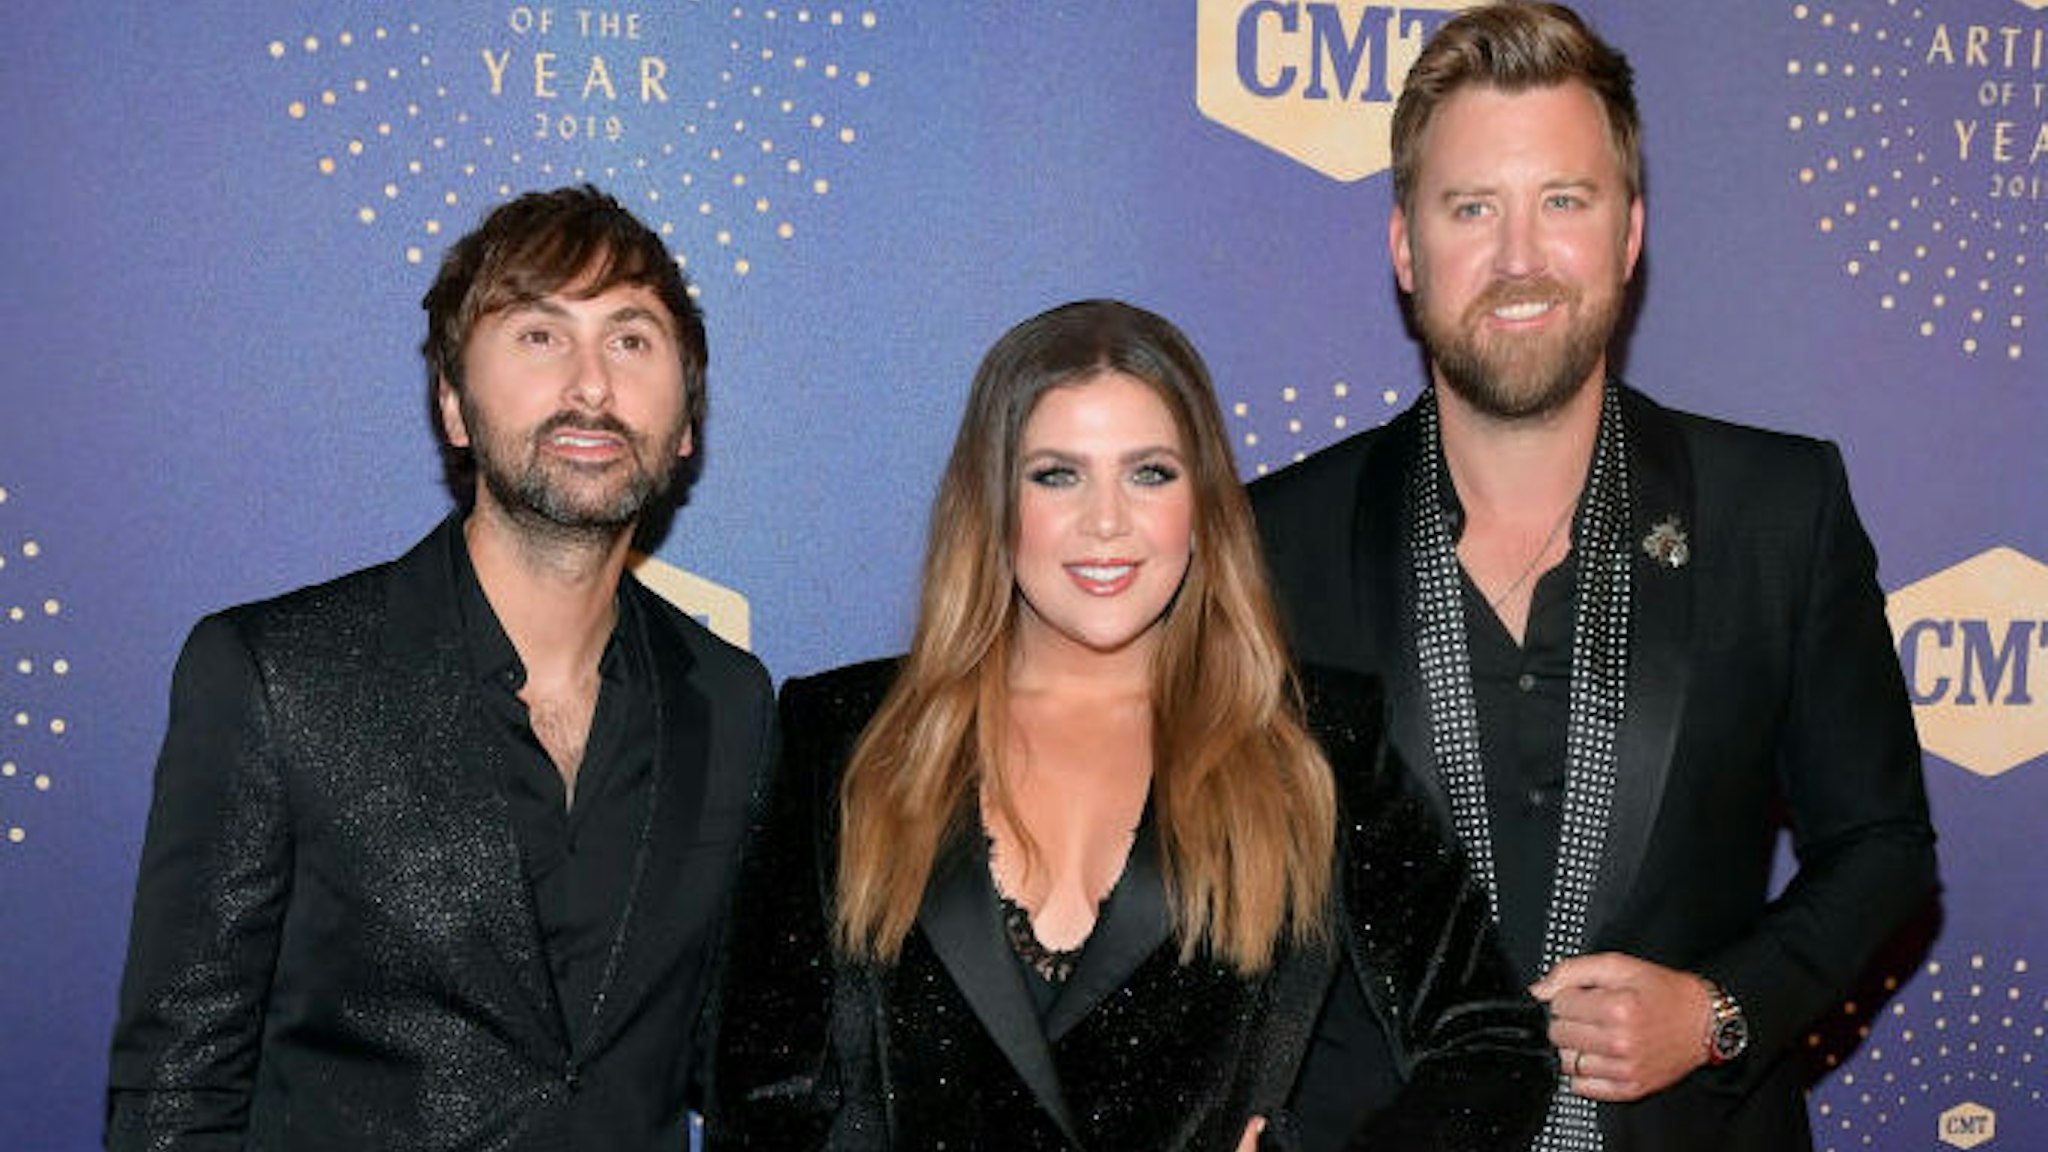 (L-R) Dave Haywood, Hillary Scott and Charles Kelley of Lady Antebellum attend the 2019 CMT Artist of the Year at Schermerhorn Symphony Center on October 16, 2019 in Nashville, Tennessee